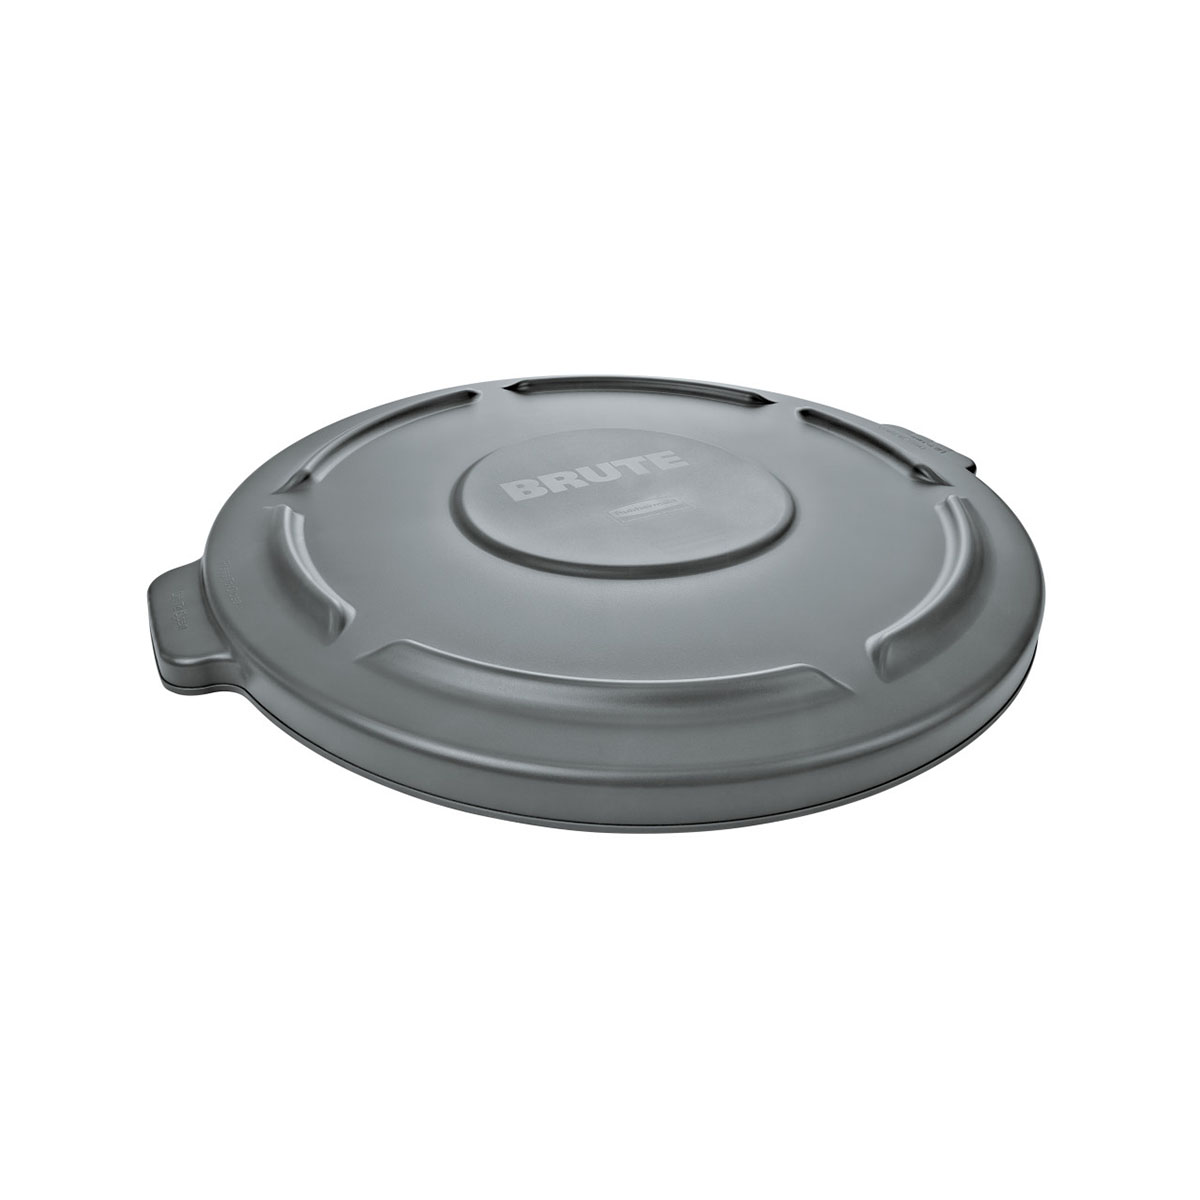 Rubbermaid Rubbermaid FG263100 Lid (Only) for 32-Gallon Round Brute Container # 2632 - Gray